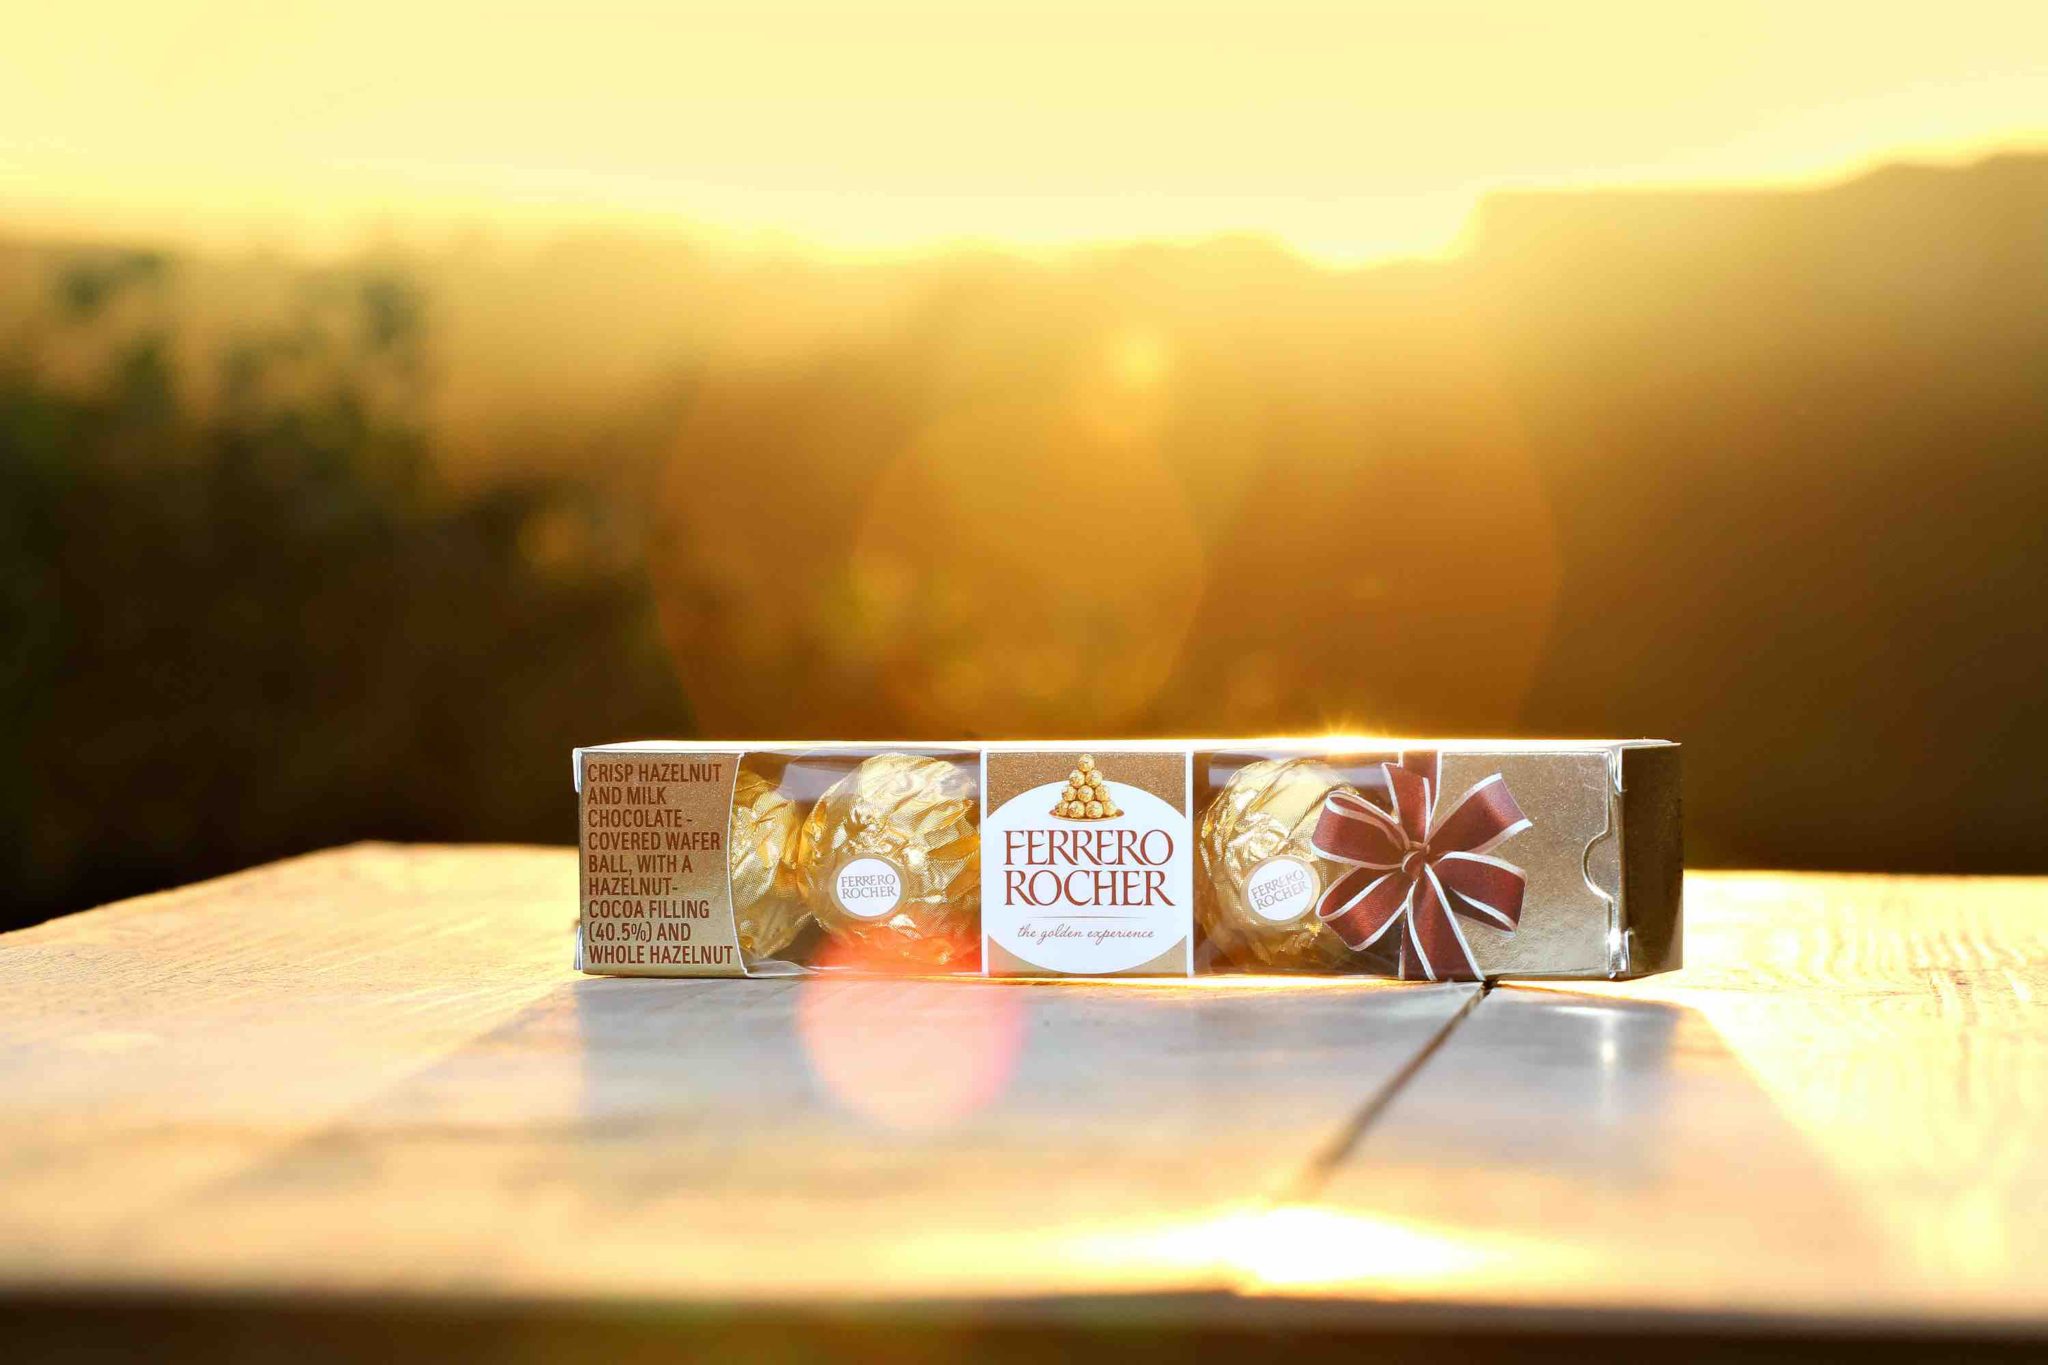 Ferrero’s 12th sustainability report targets major carbon footprint reduction